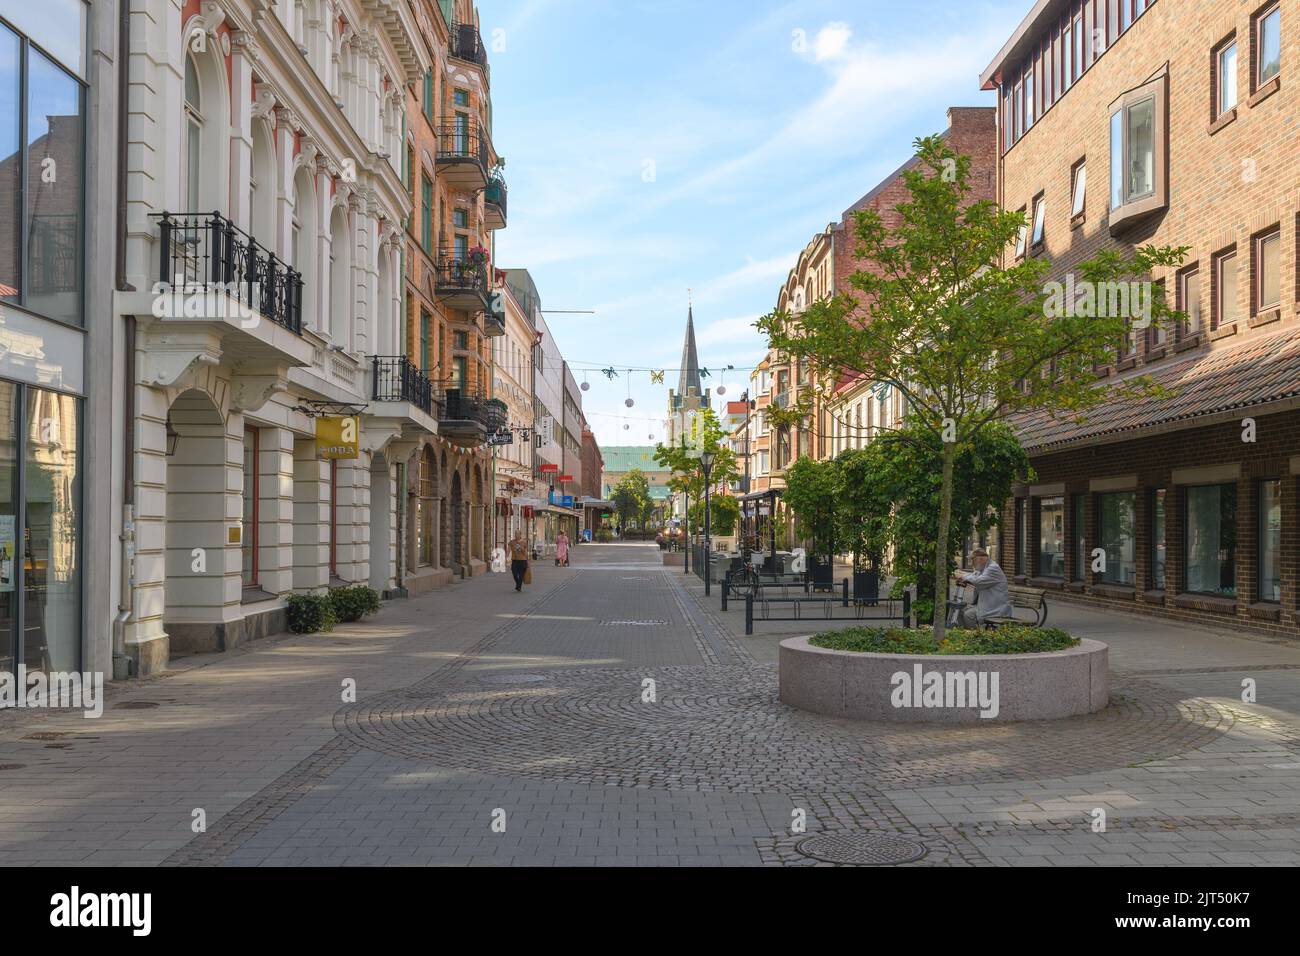 Halmstad, Sweden - August 21, 2022: Kopmansgatan street in Swedish city of Halmstad. This is the famous street in central part of capital of Halland c Stock Photo